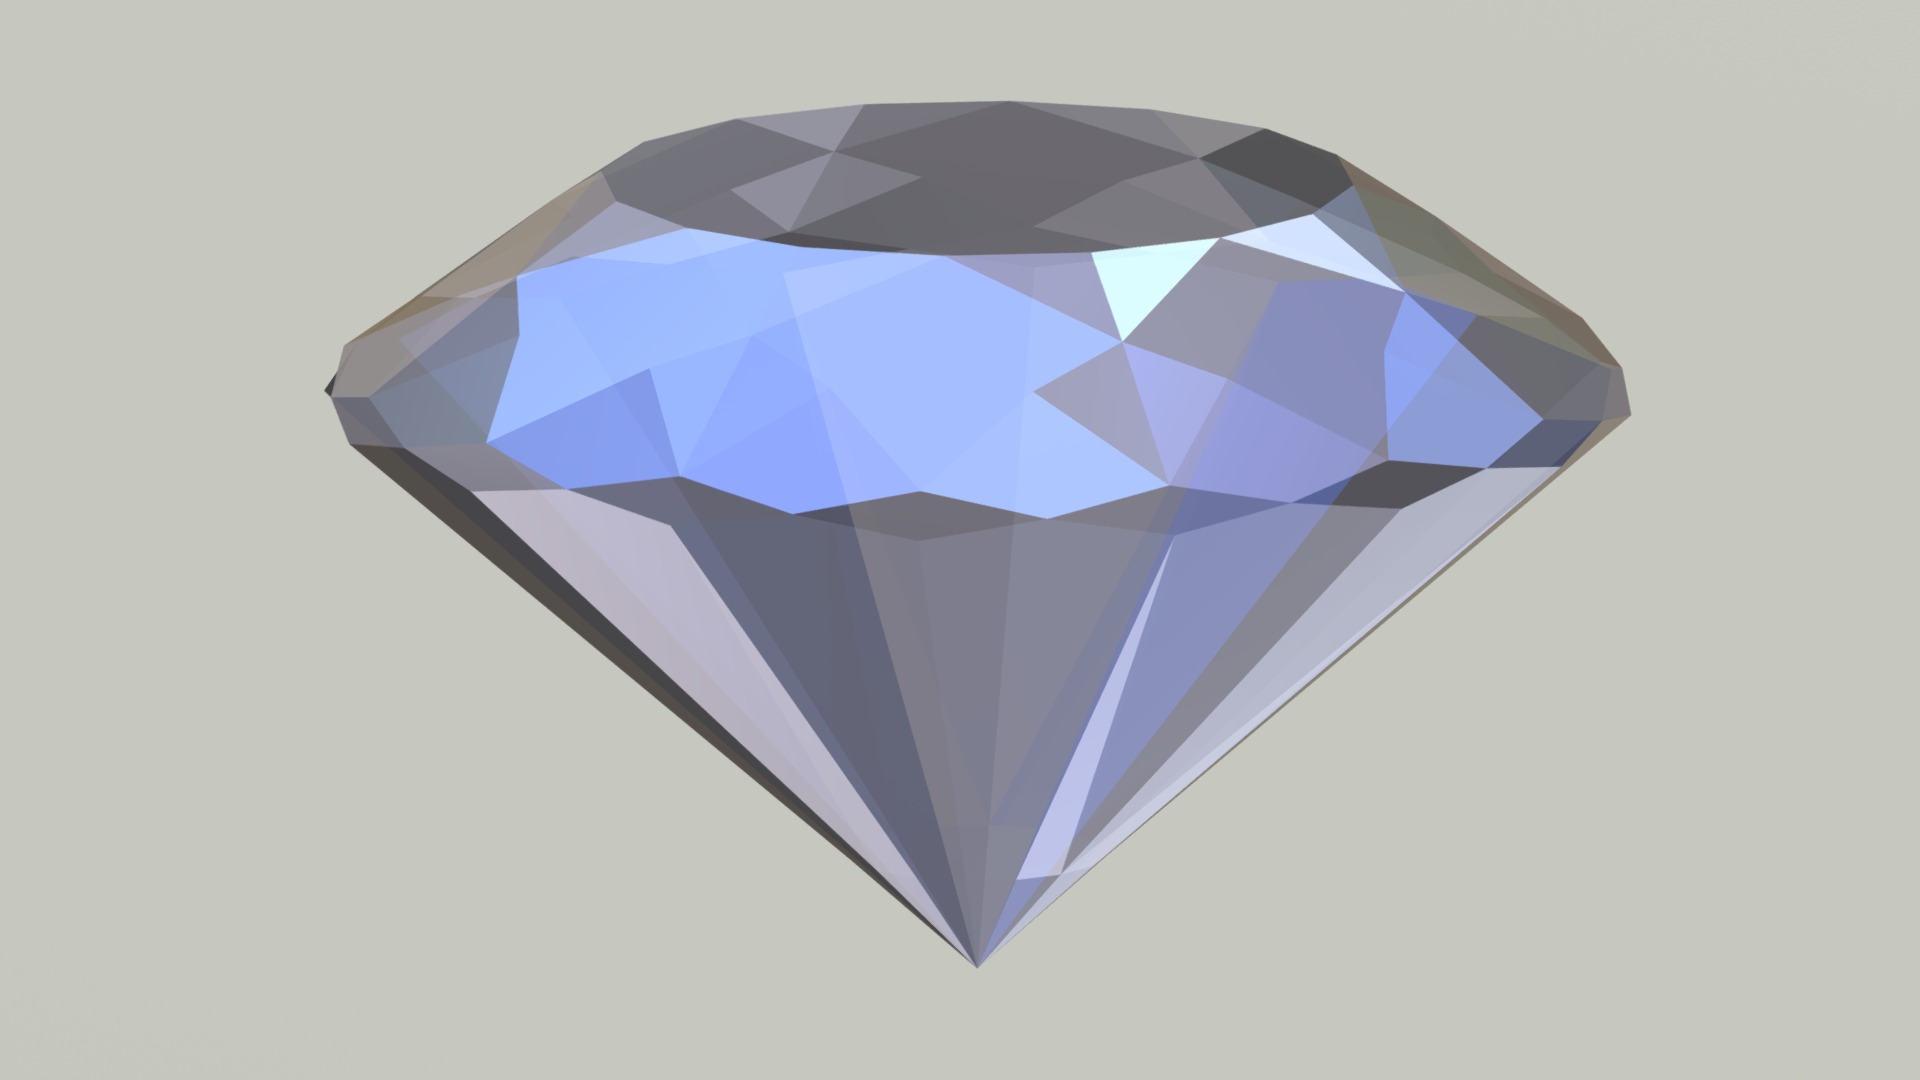 2018.04.22 Blue Diamond /
The diamond worked pretty well!
Probably the model's shape does matter 3d model